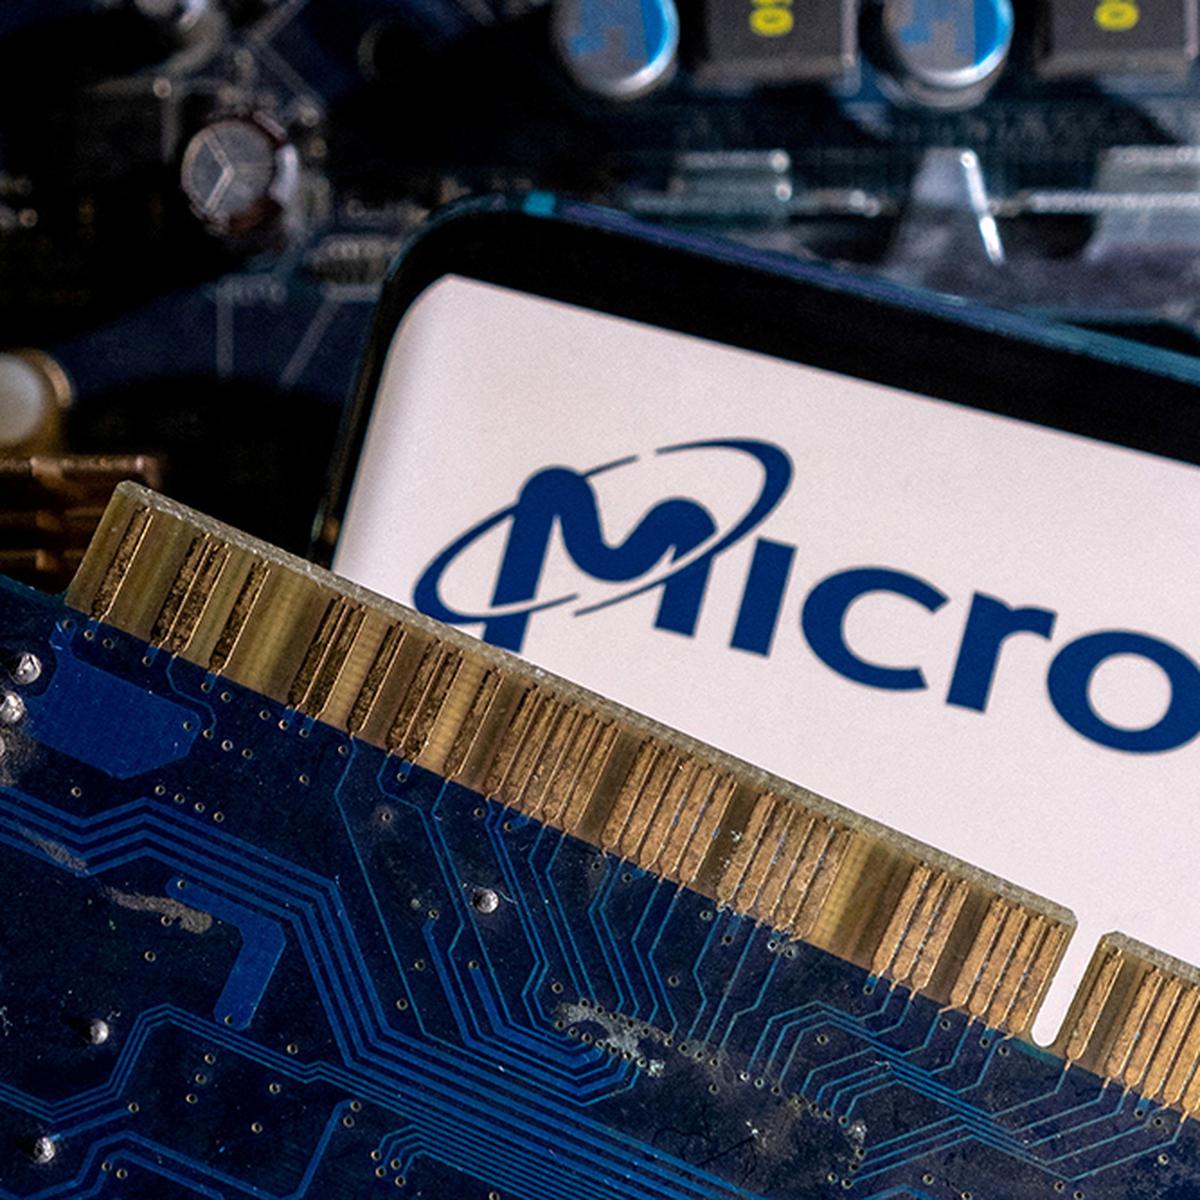 Micron says it is committed to China, invests $602 million in plant